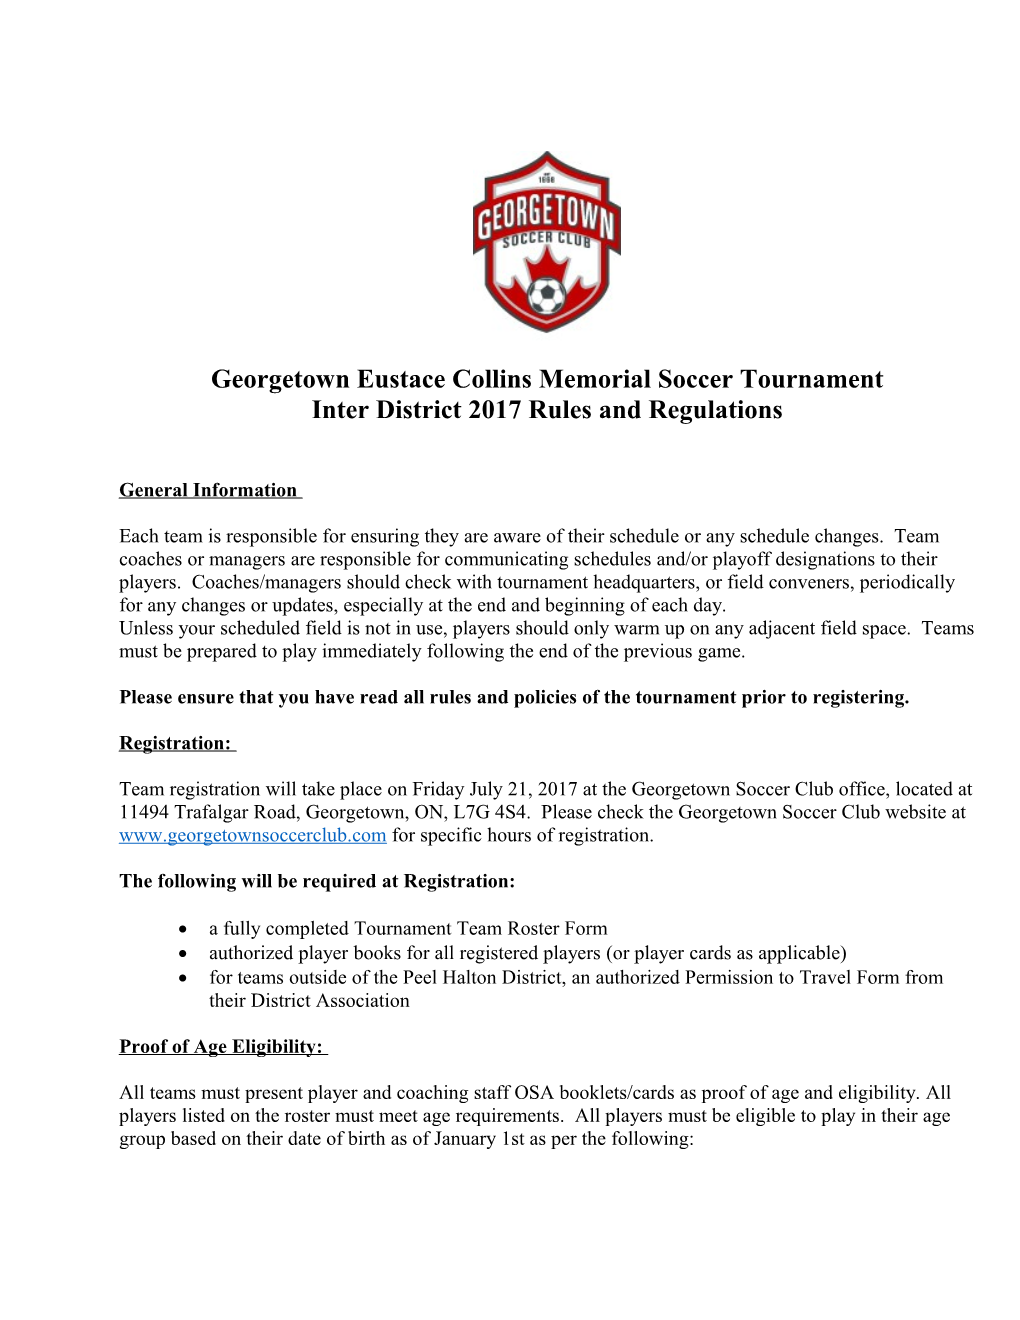 Rules and Regulations - Inter-District Tournament